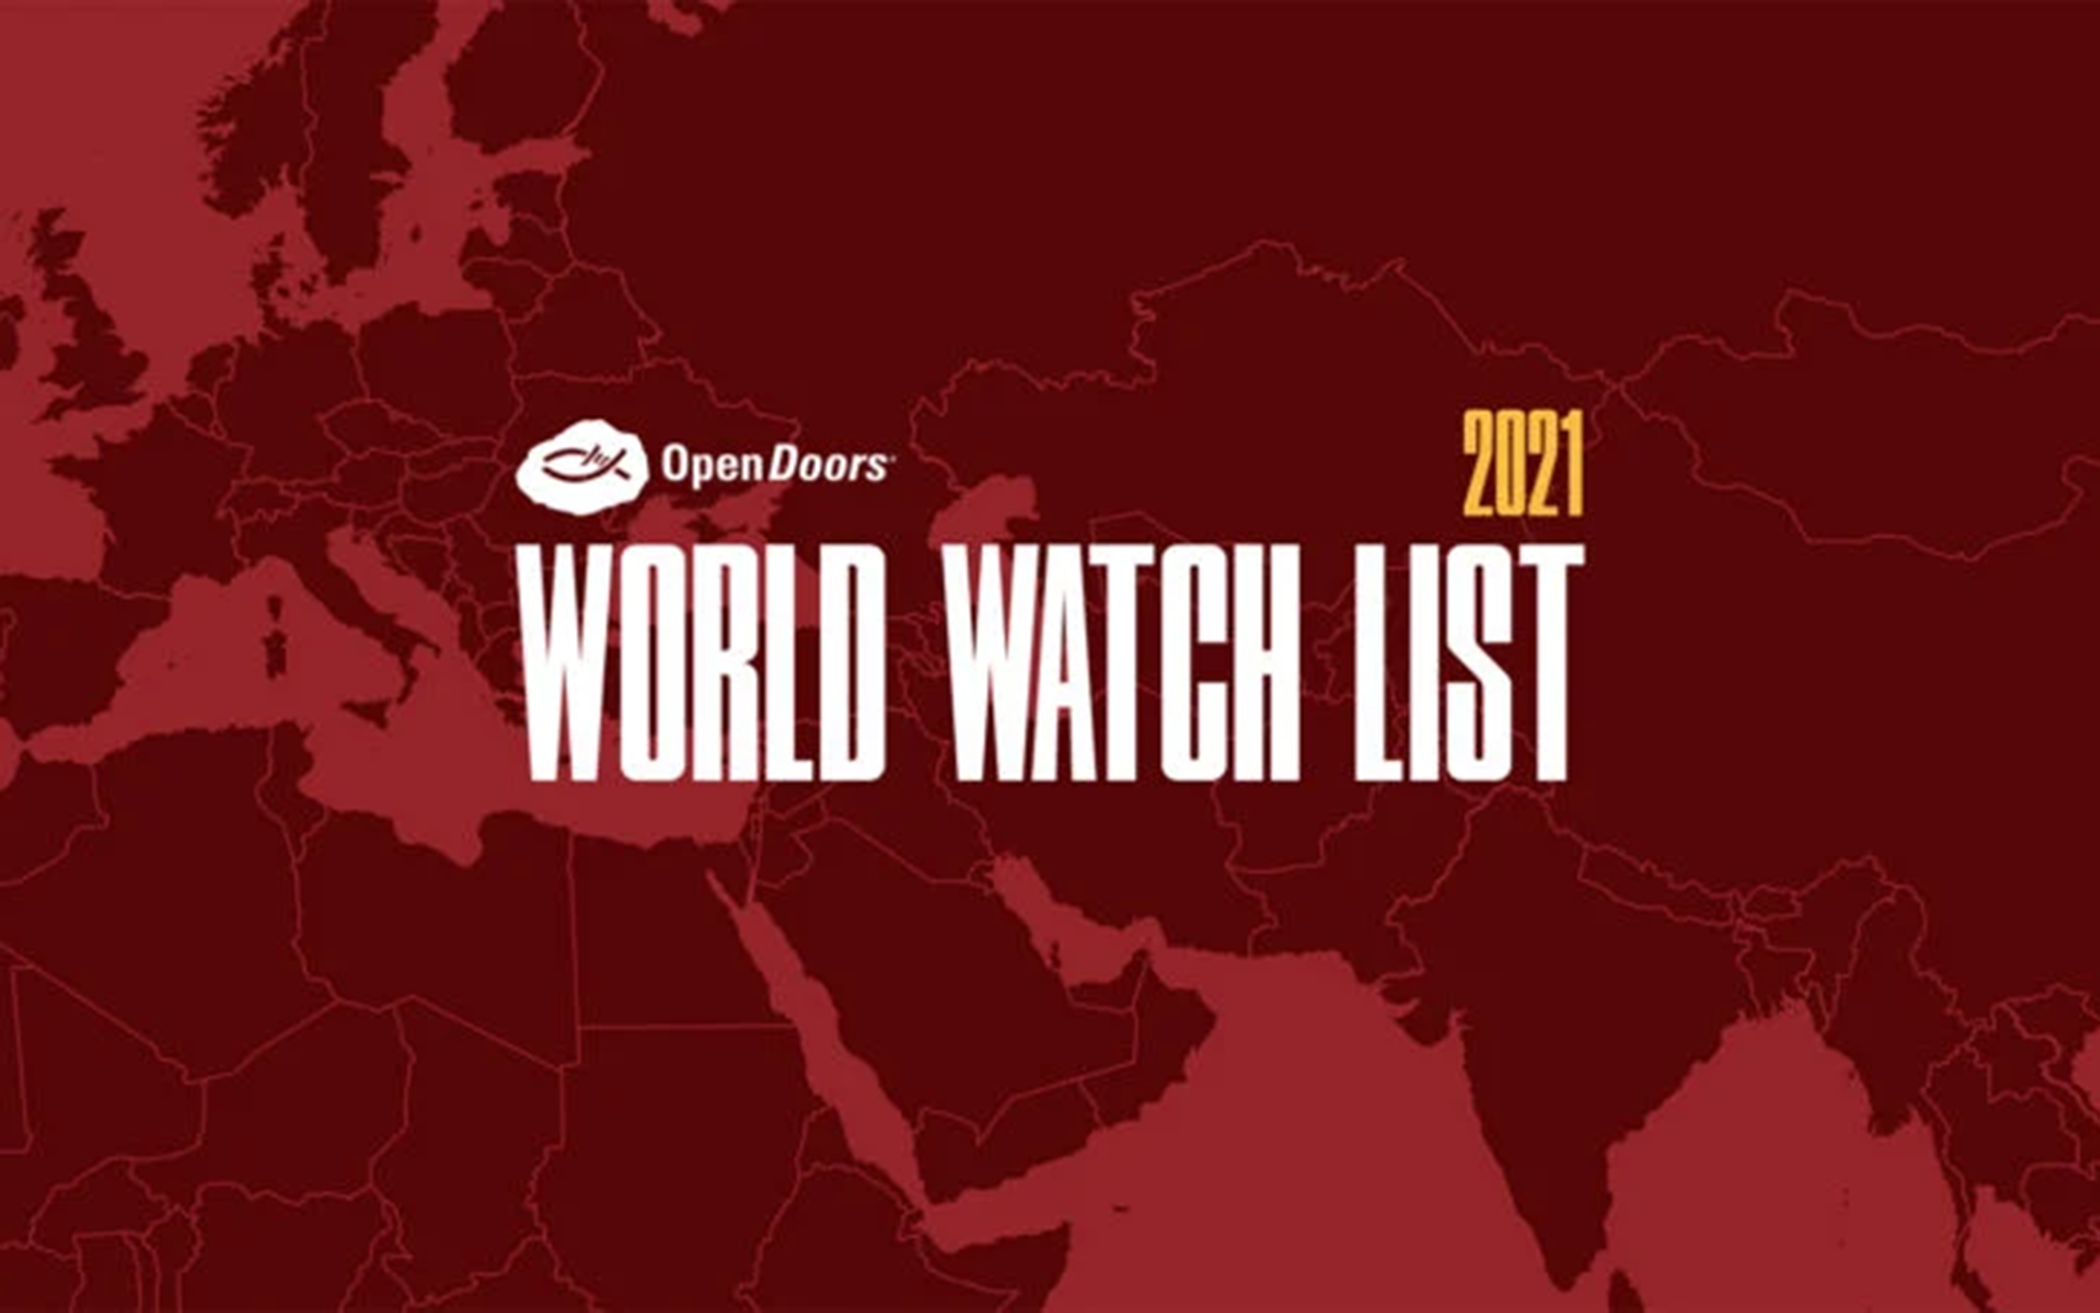 Open Doors’ 2021 Watch List Shows Impact of COVID-19